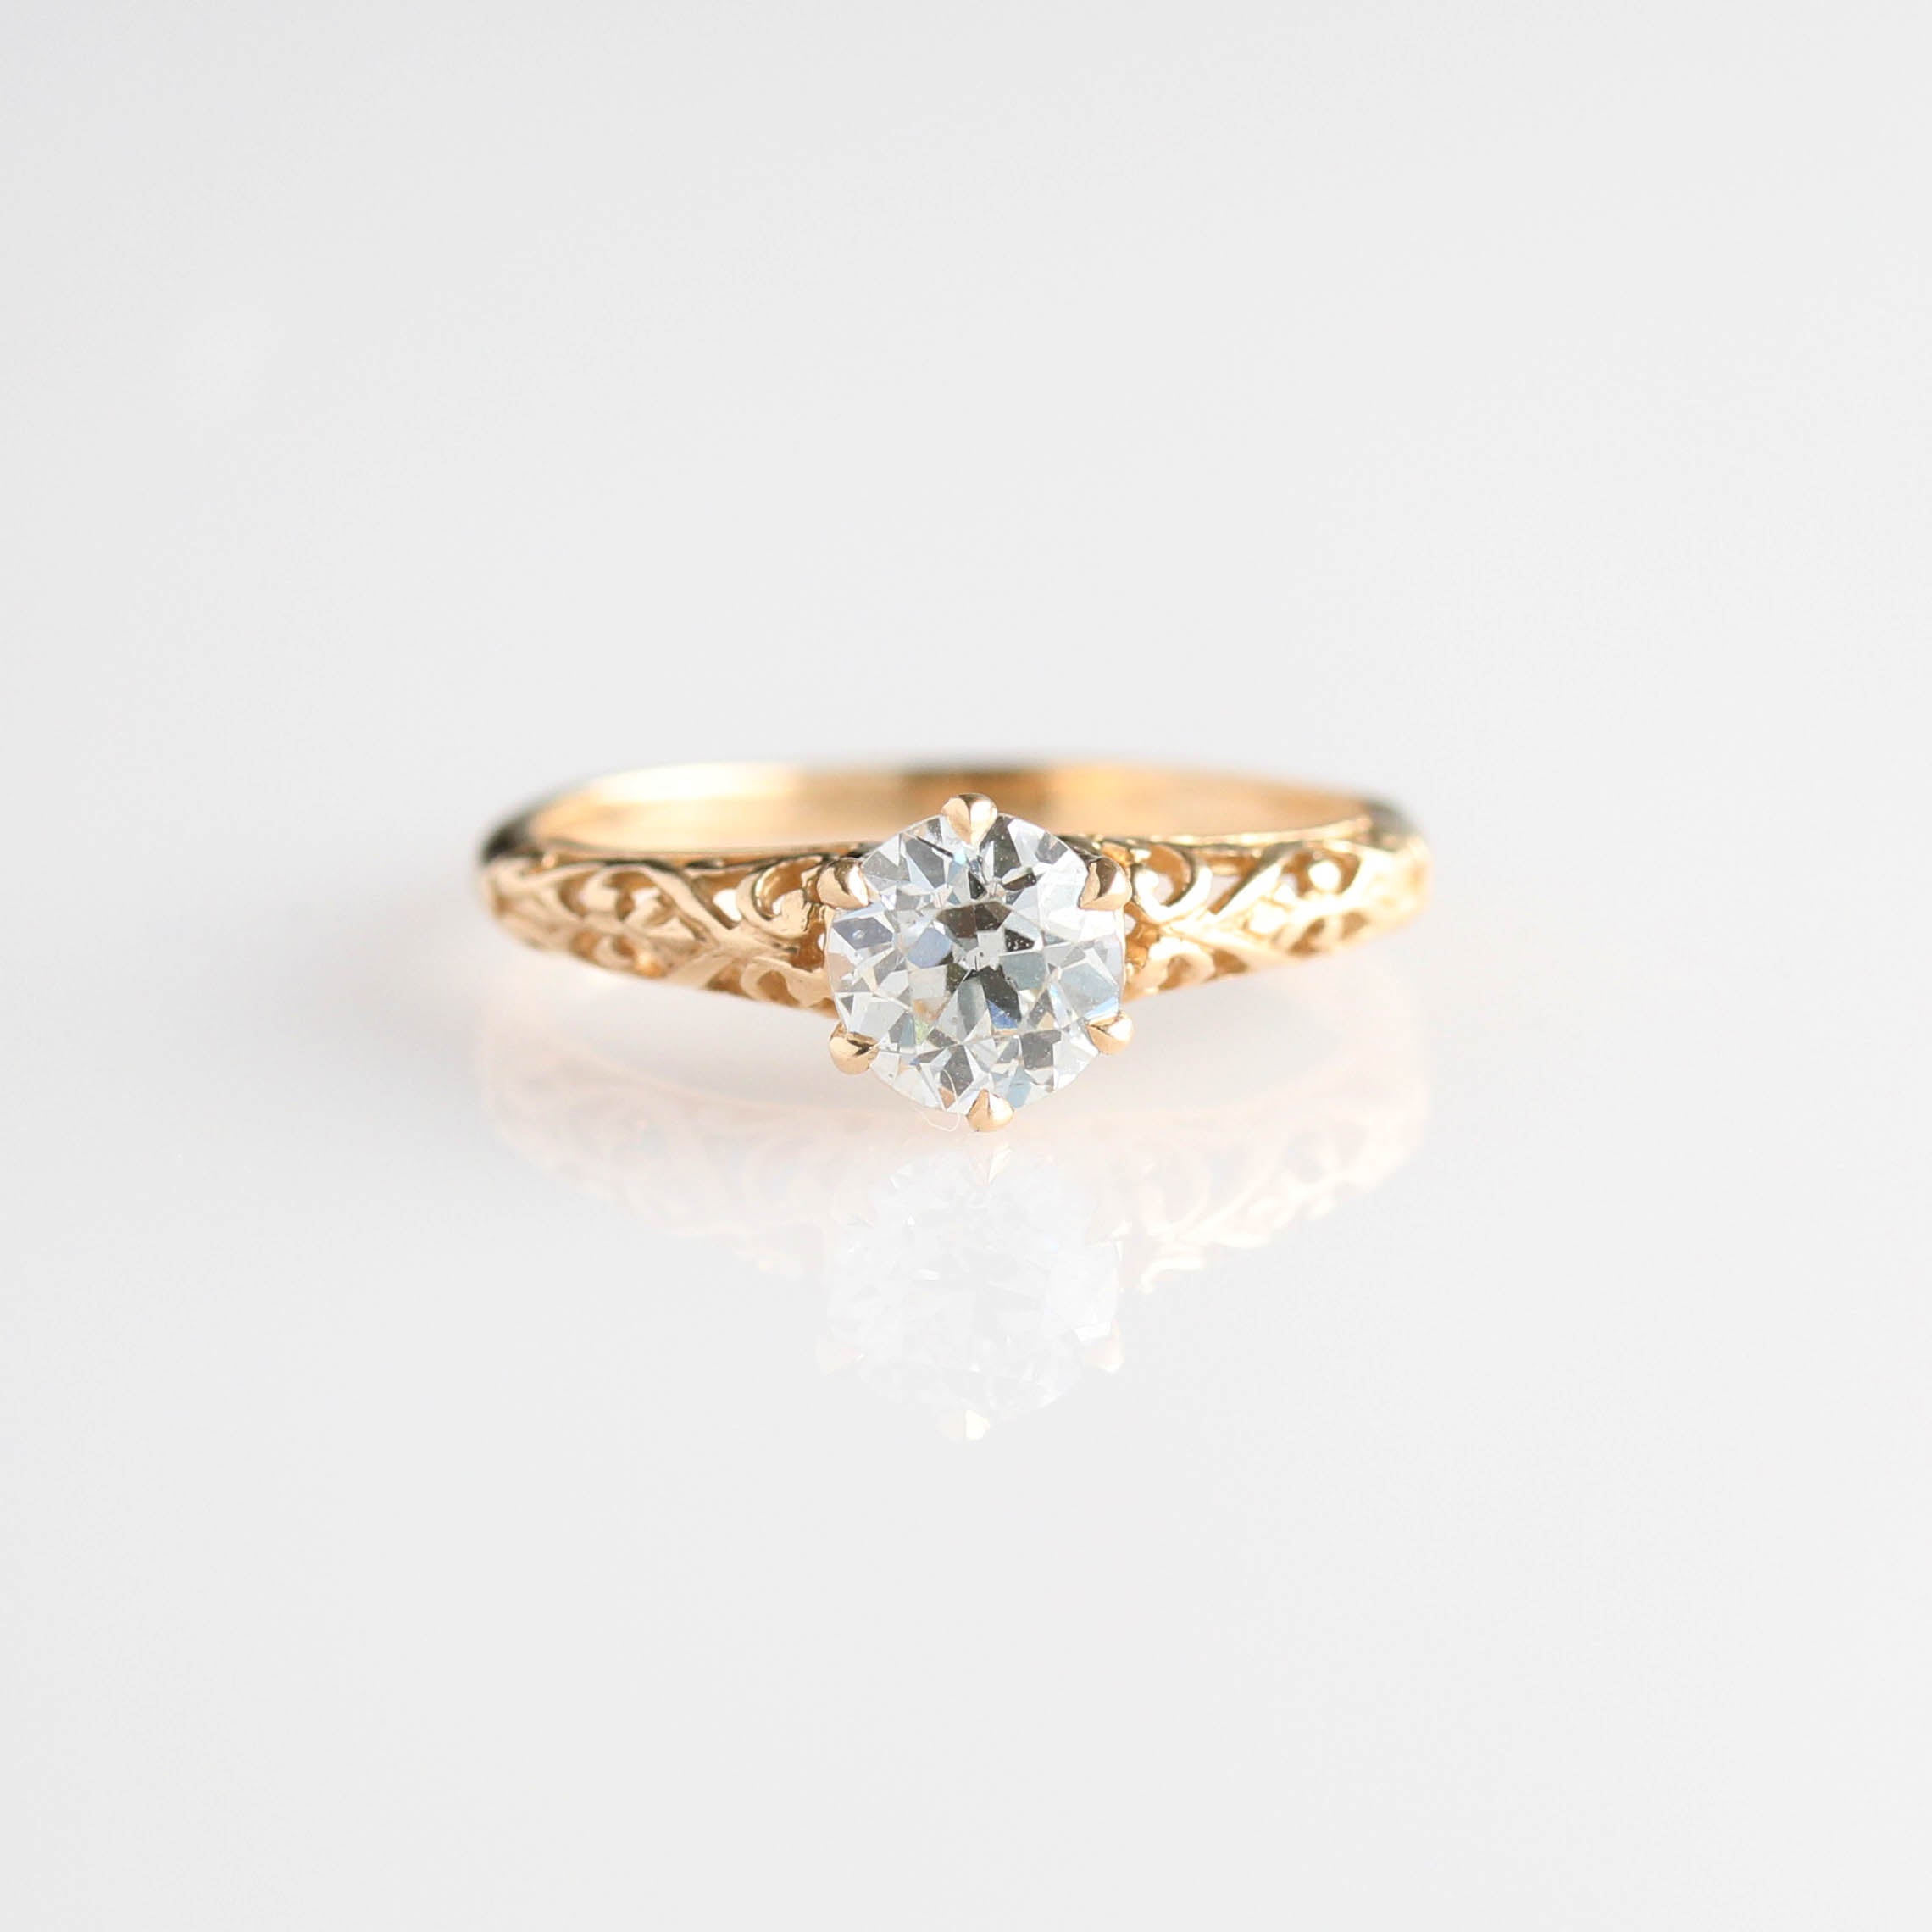 Replica Edwardian Engagement Ring #1022-17 - Leigh Jay & Co.